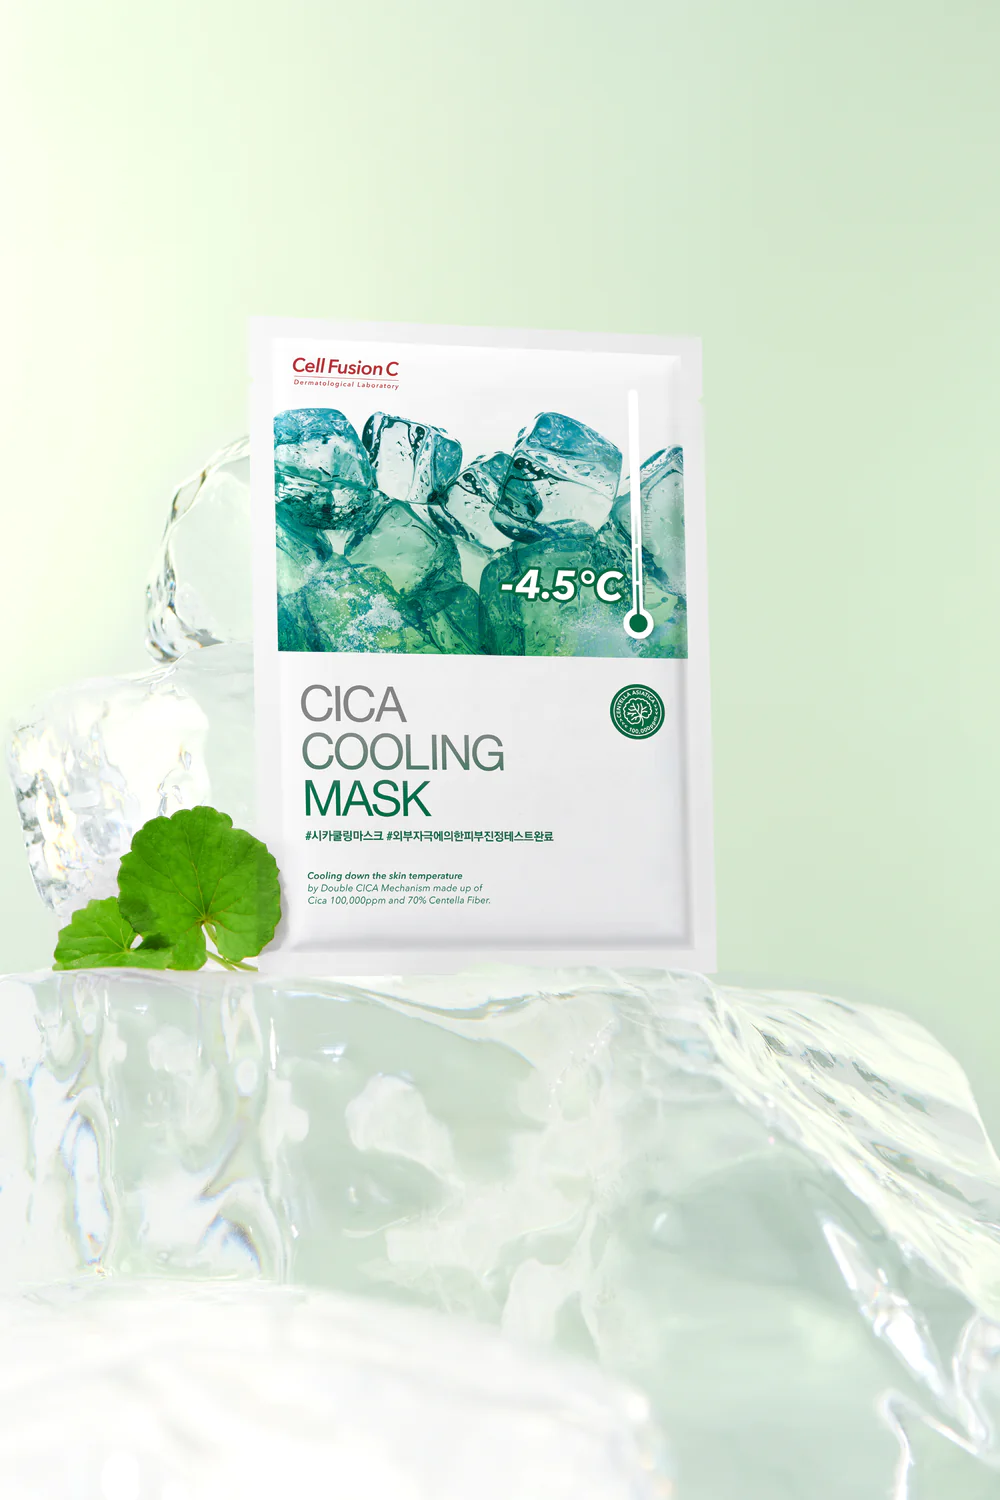 [CellFusionC] Cica Cooling Mask - 5 sheets